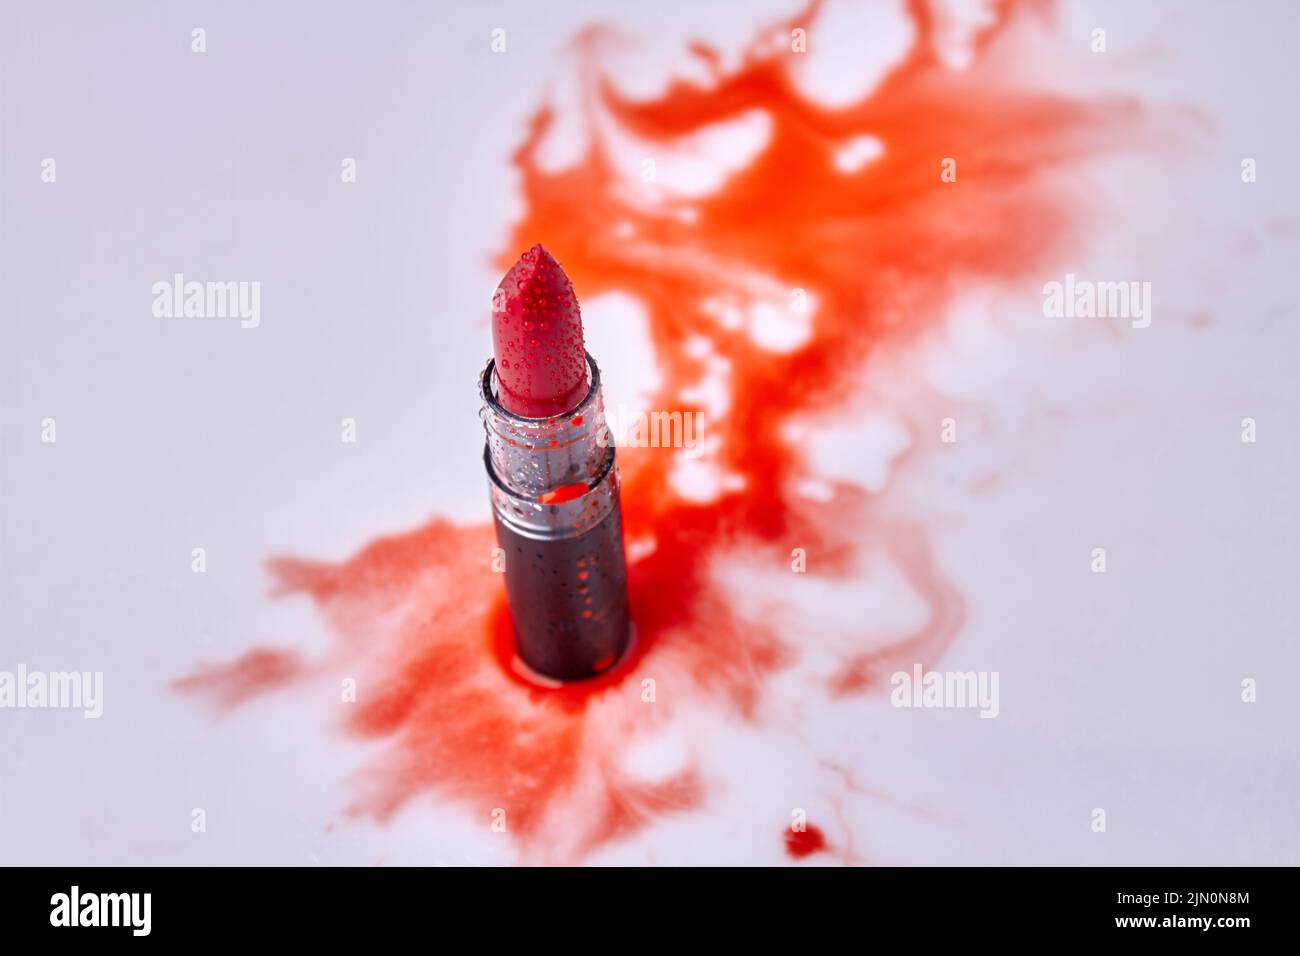 Red lipstick with water droplets top view. Wet red stains on white background. Stock Photo